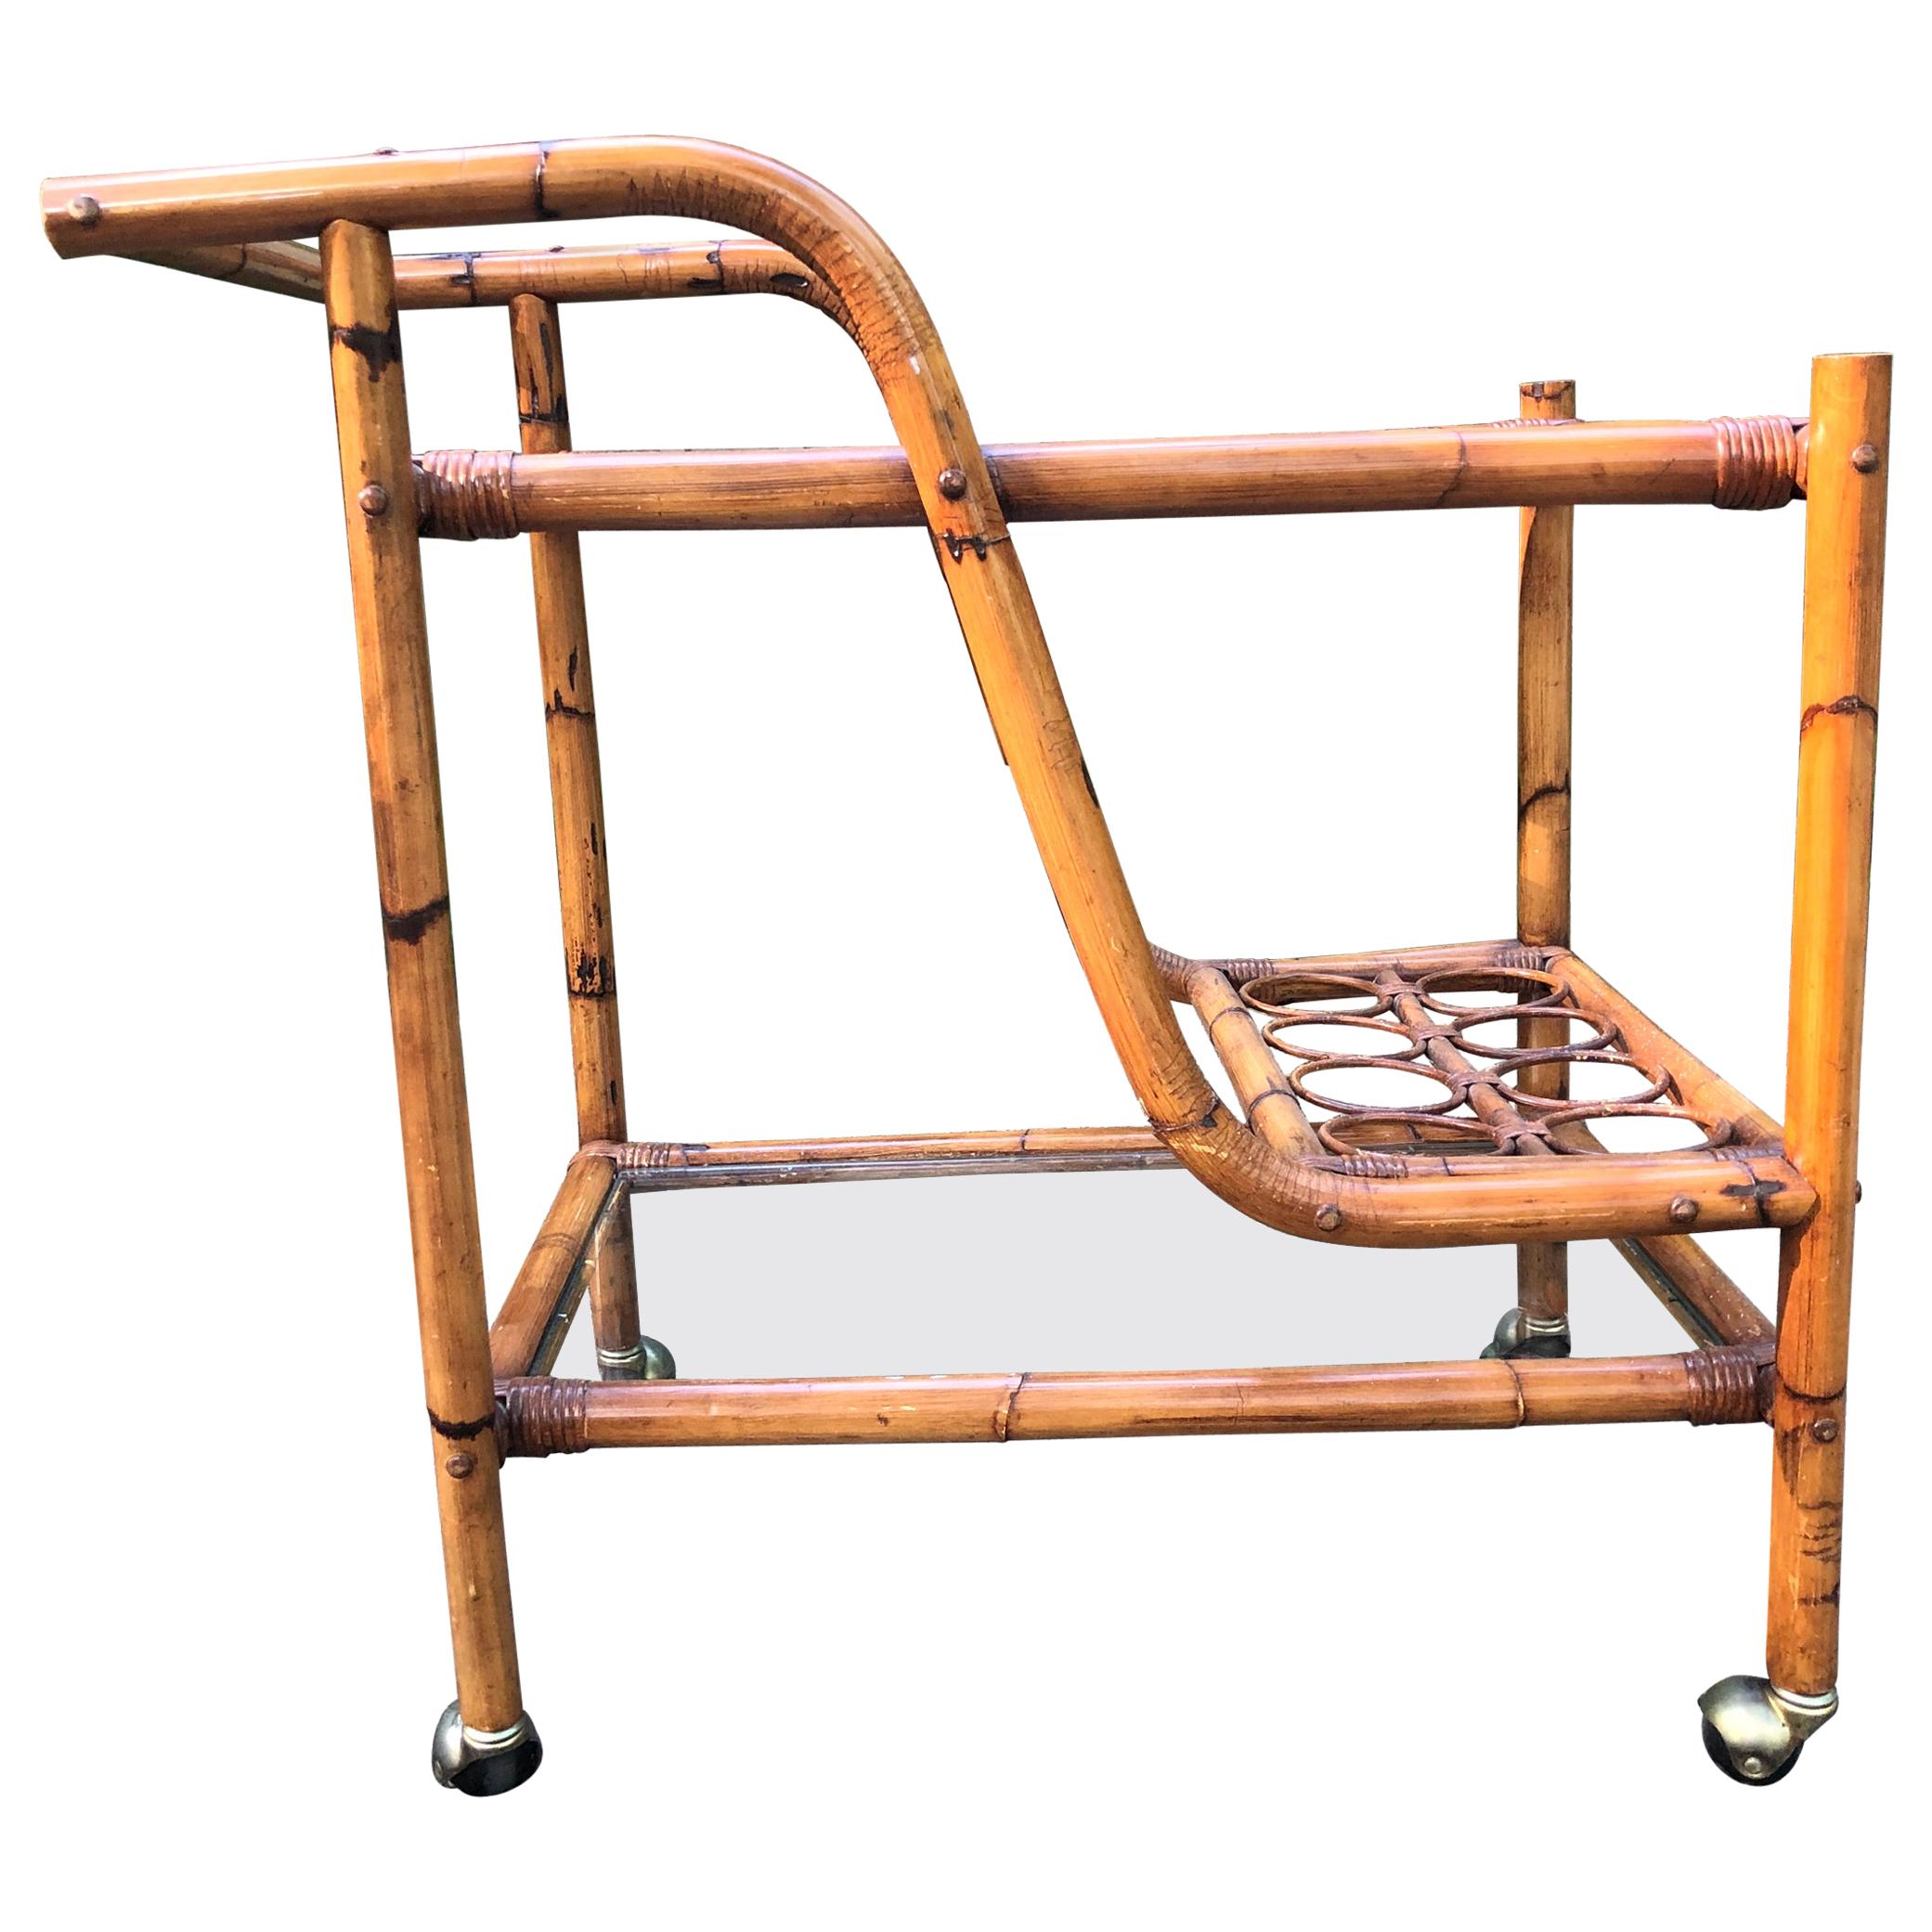 Very Cool Mid-Century Modern Bamboo Bar Cart For Sale